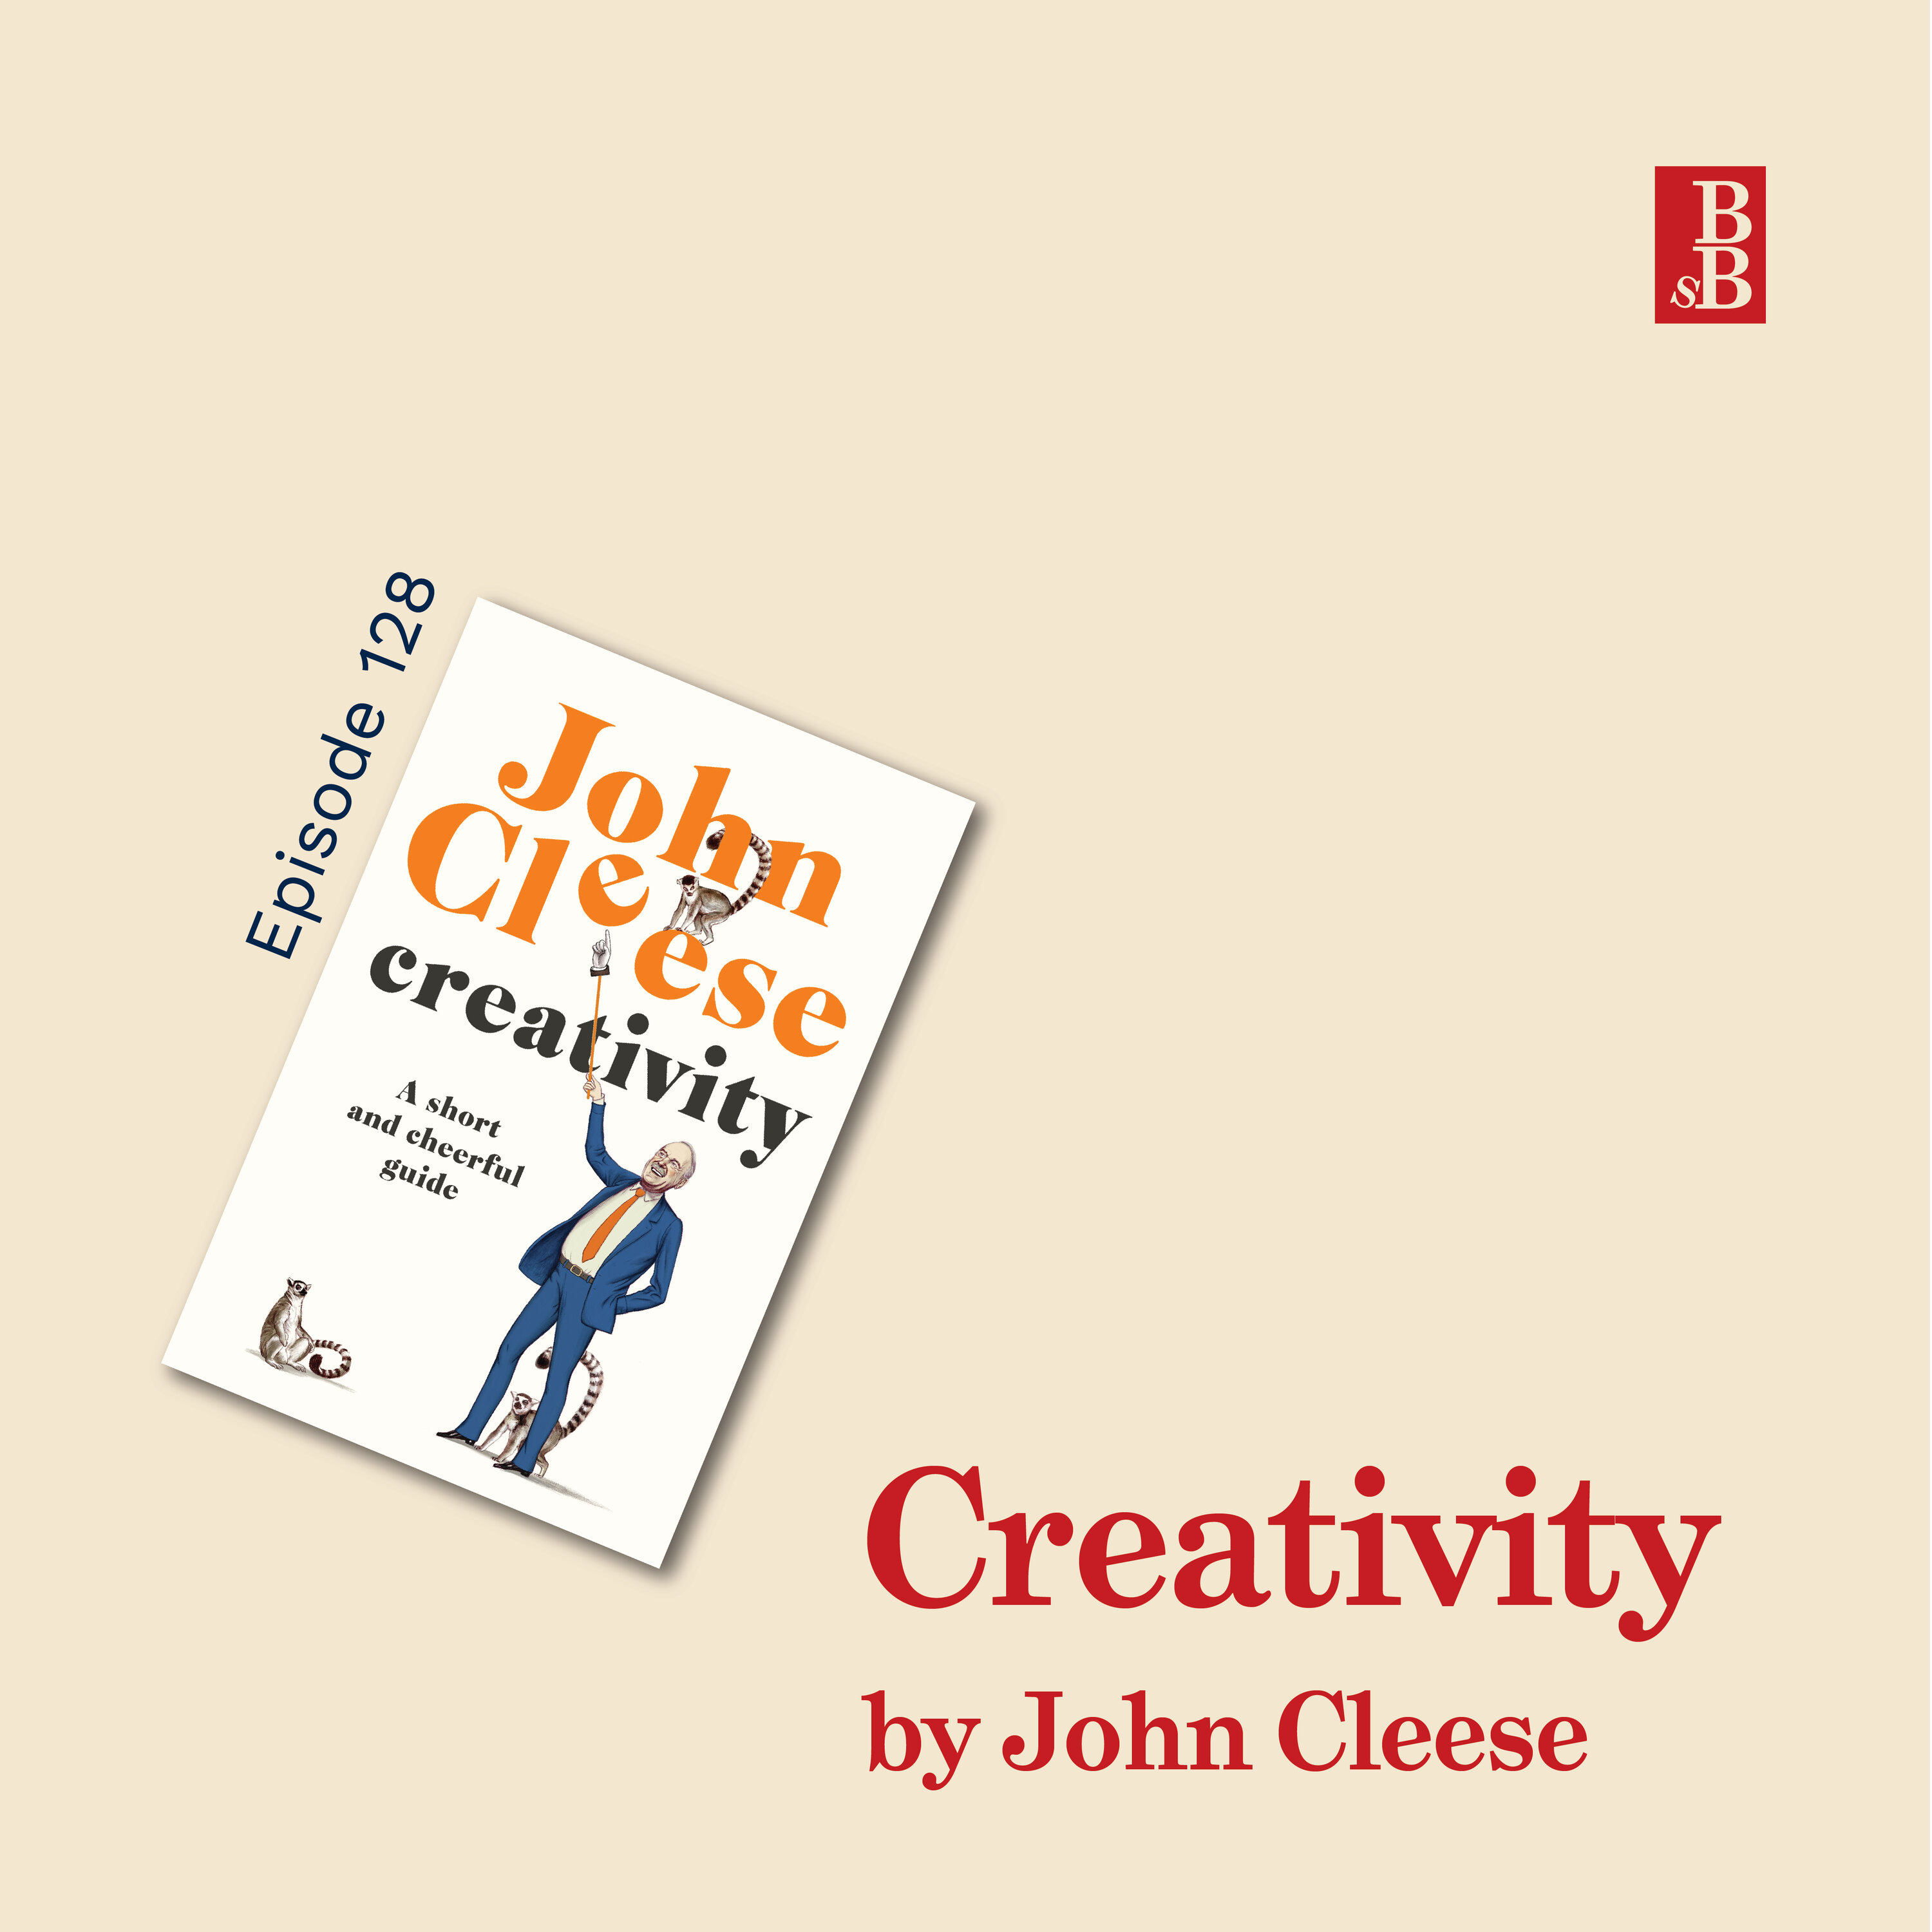 Creativity: A Short and Cheerful Guide by John Cleese: how to learn to be creative Image